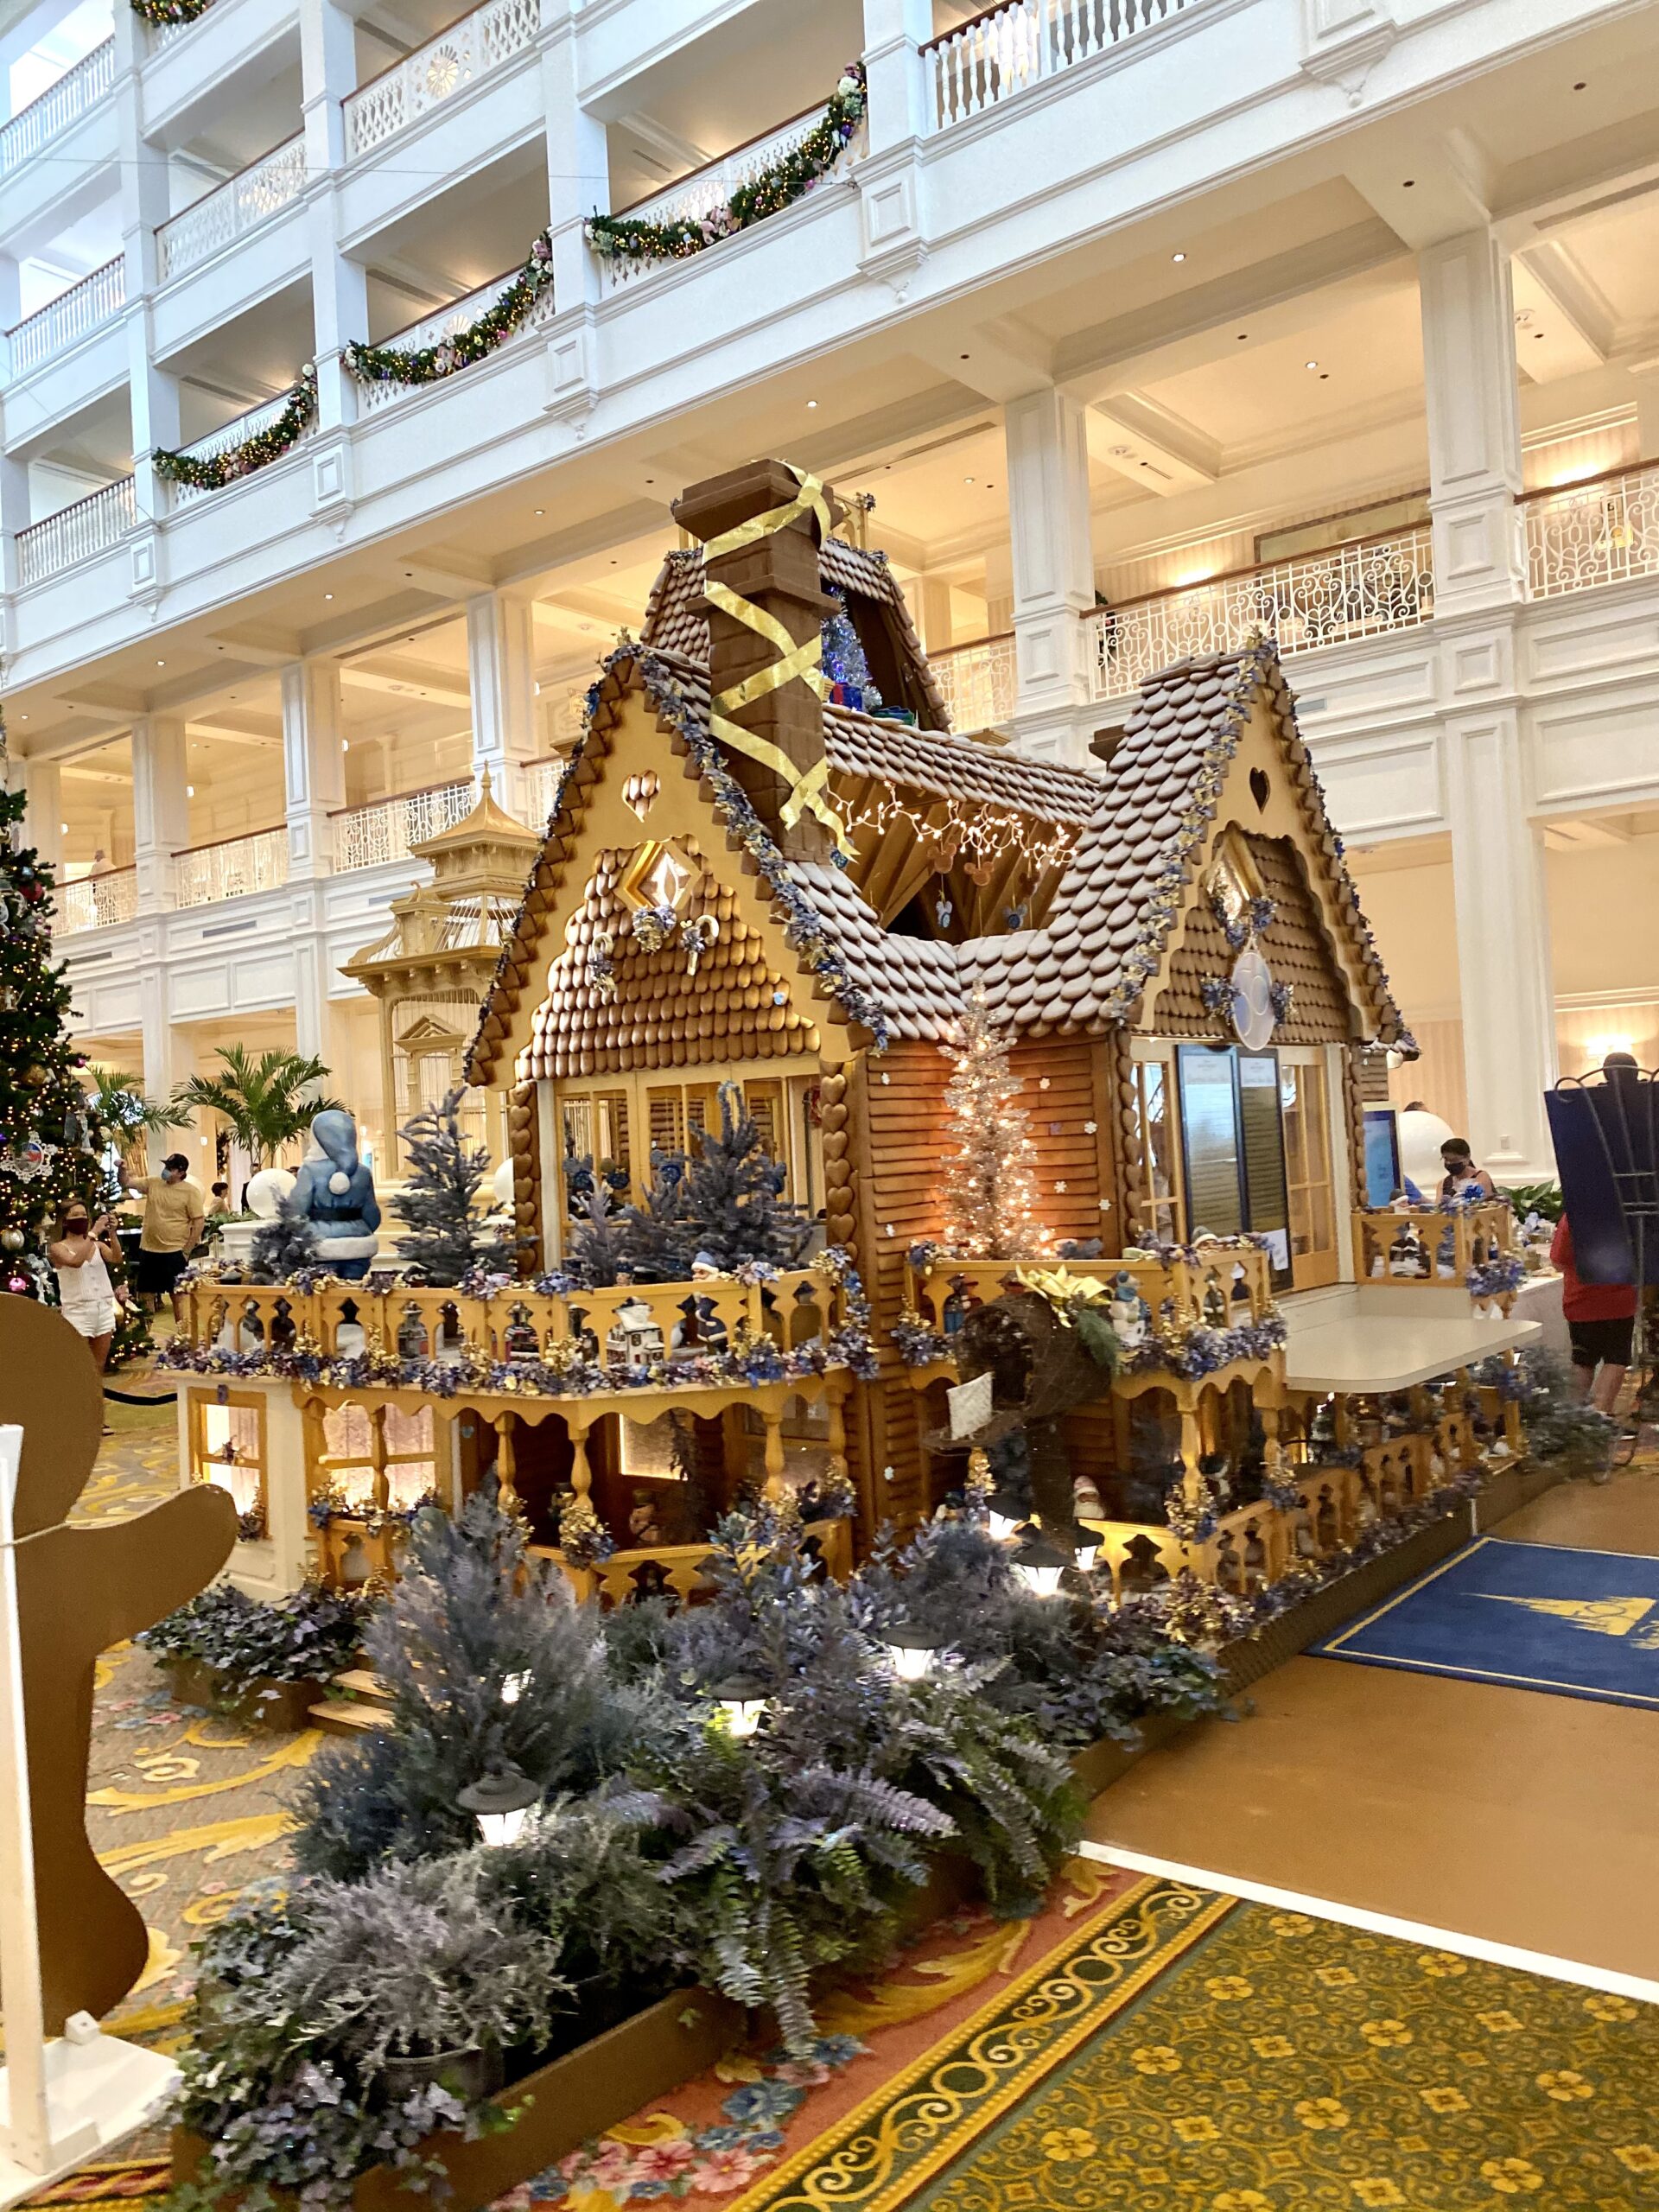 This gingerbread house is ready for the Holidays at Disney 